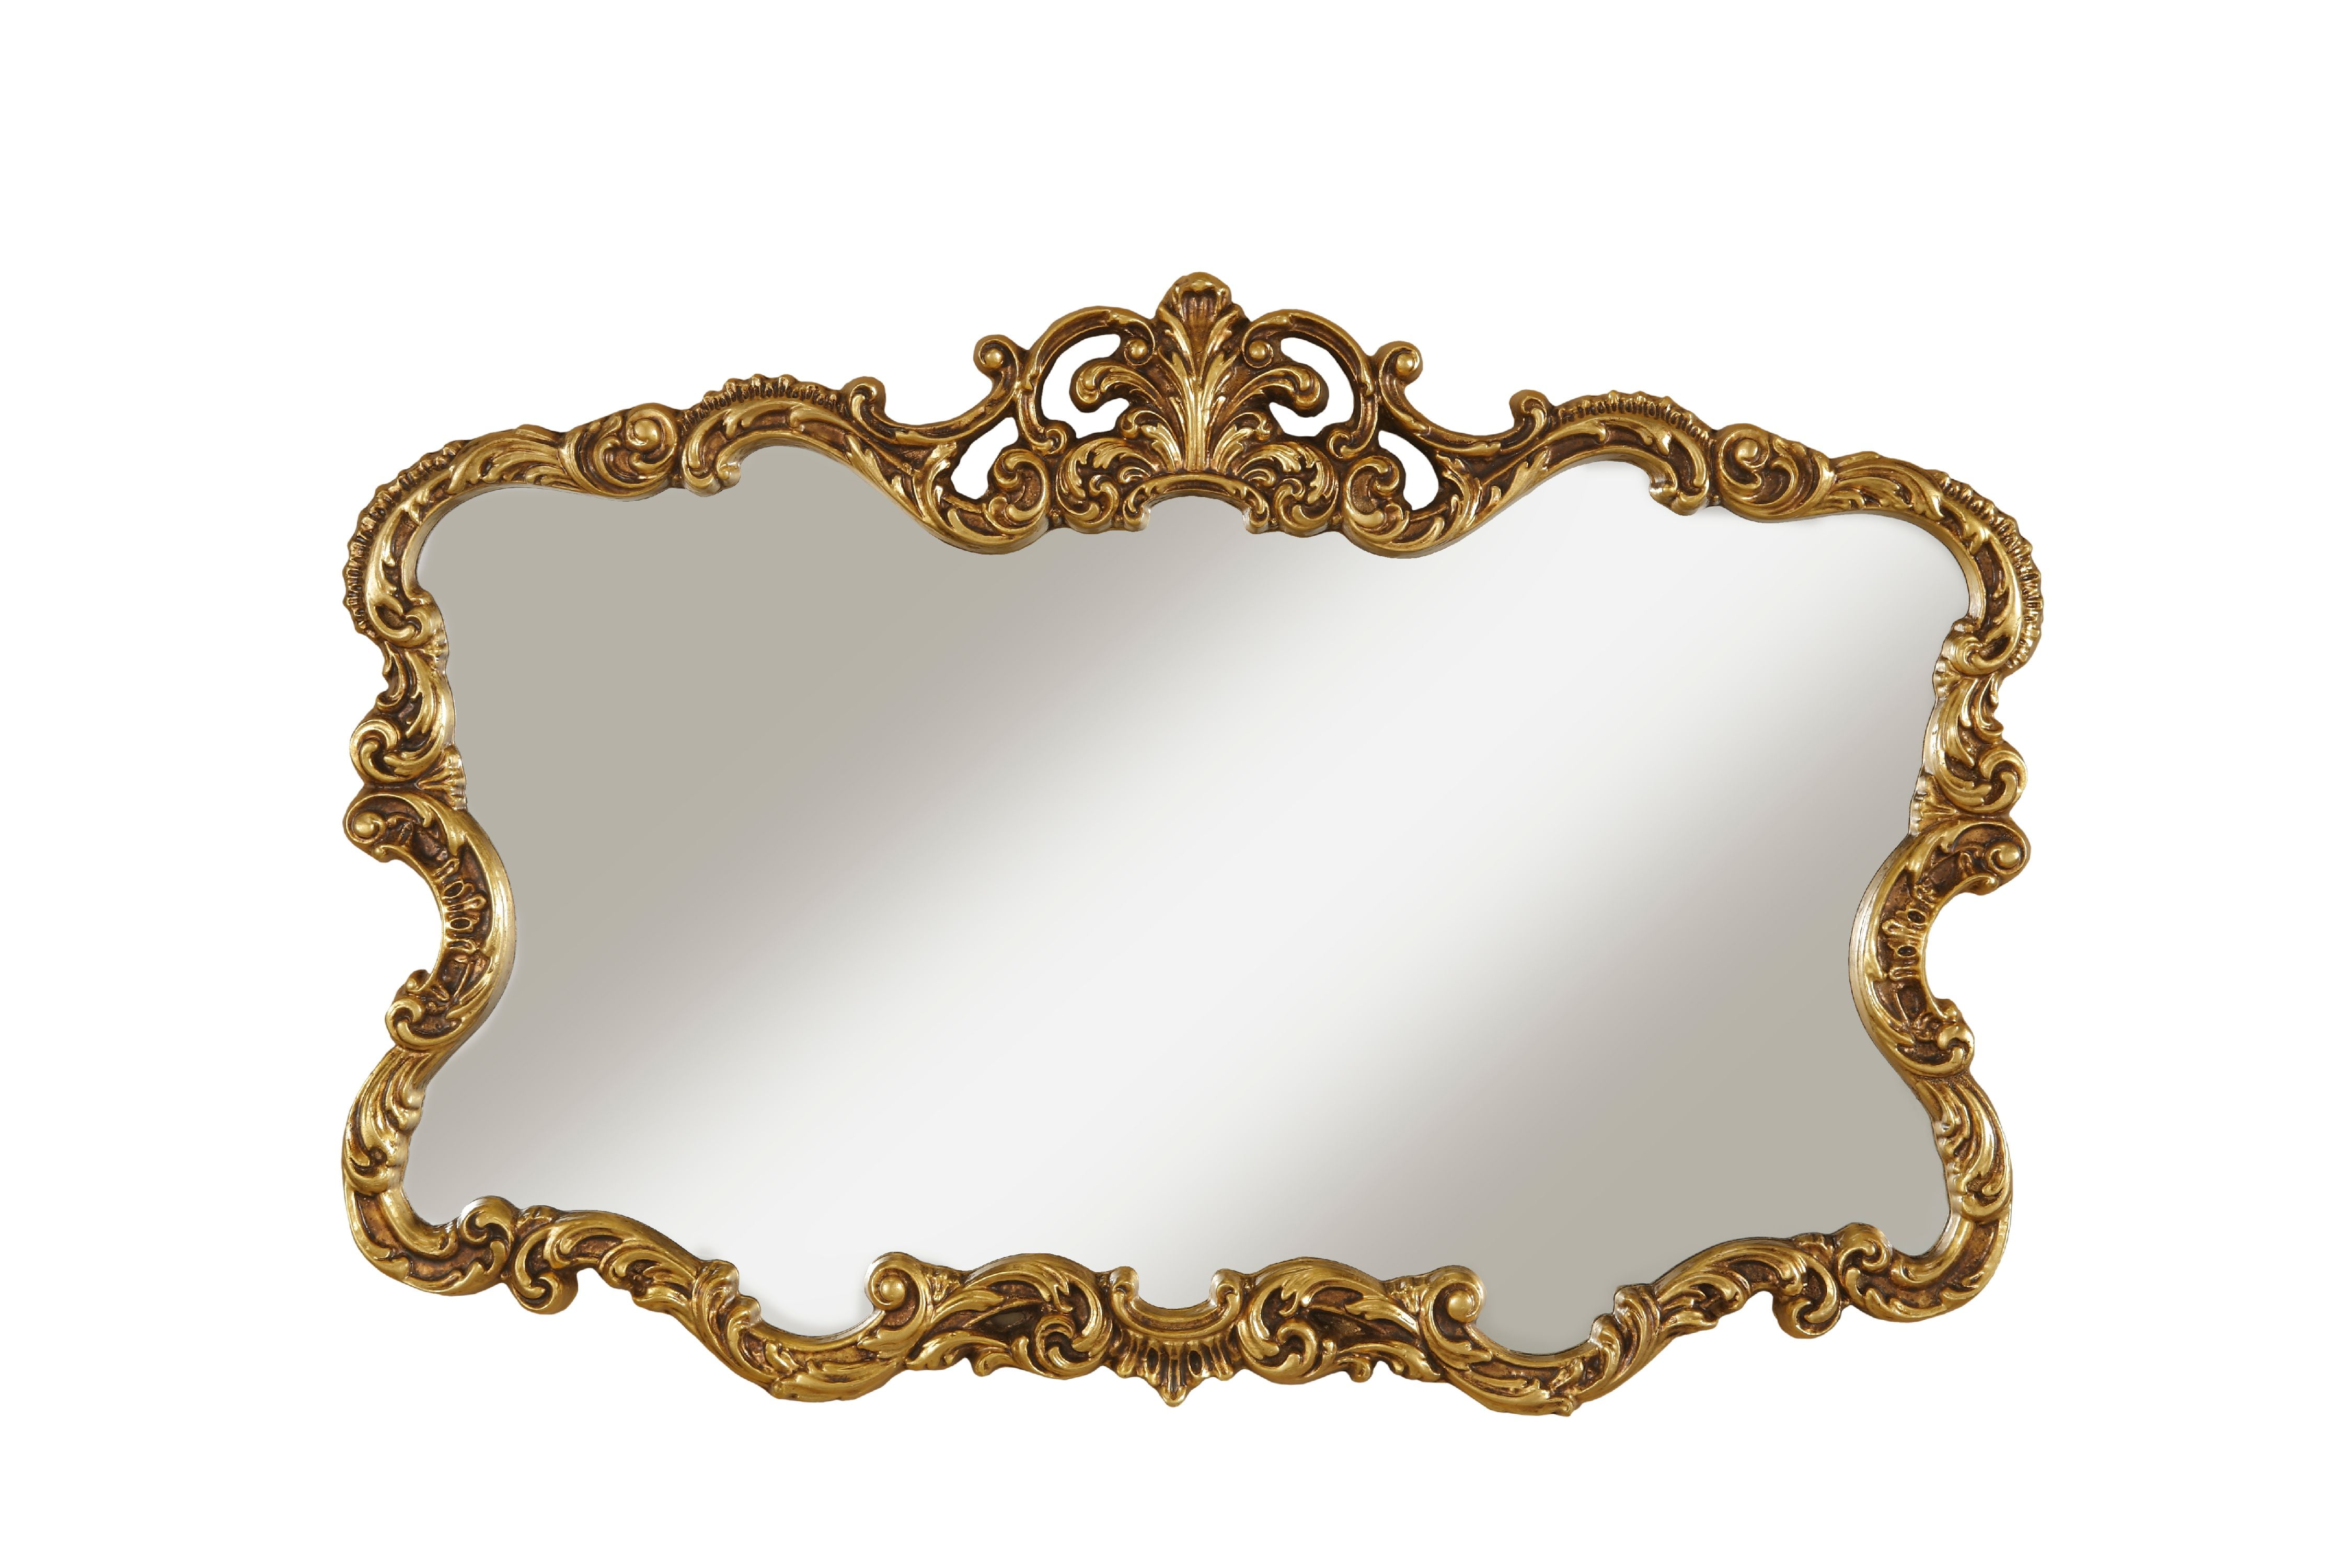 Aureate Antique Gold Wall Mirror, Antique Gold Ornate Traditional Full Length Mirror